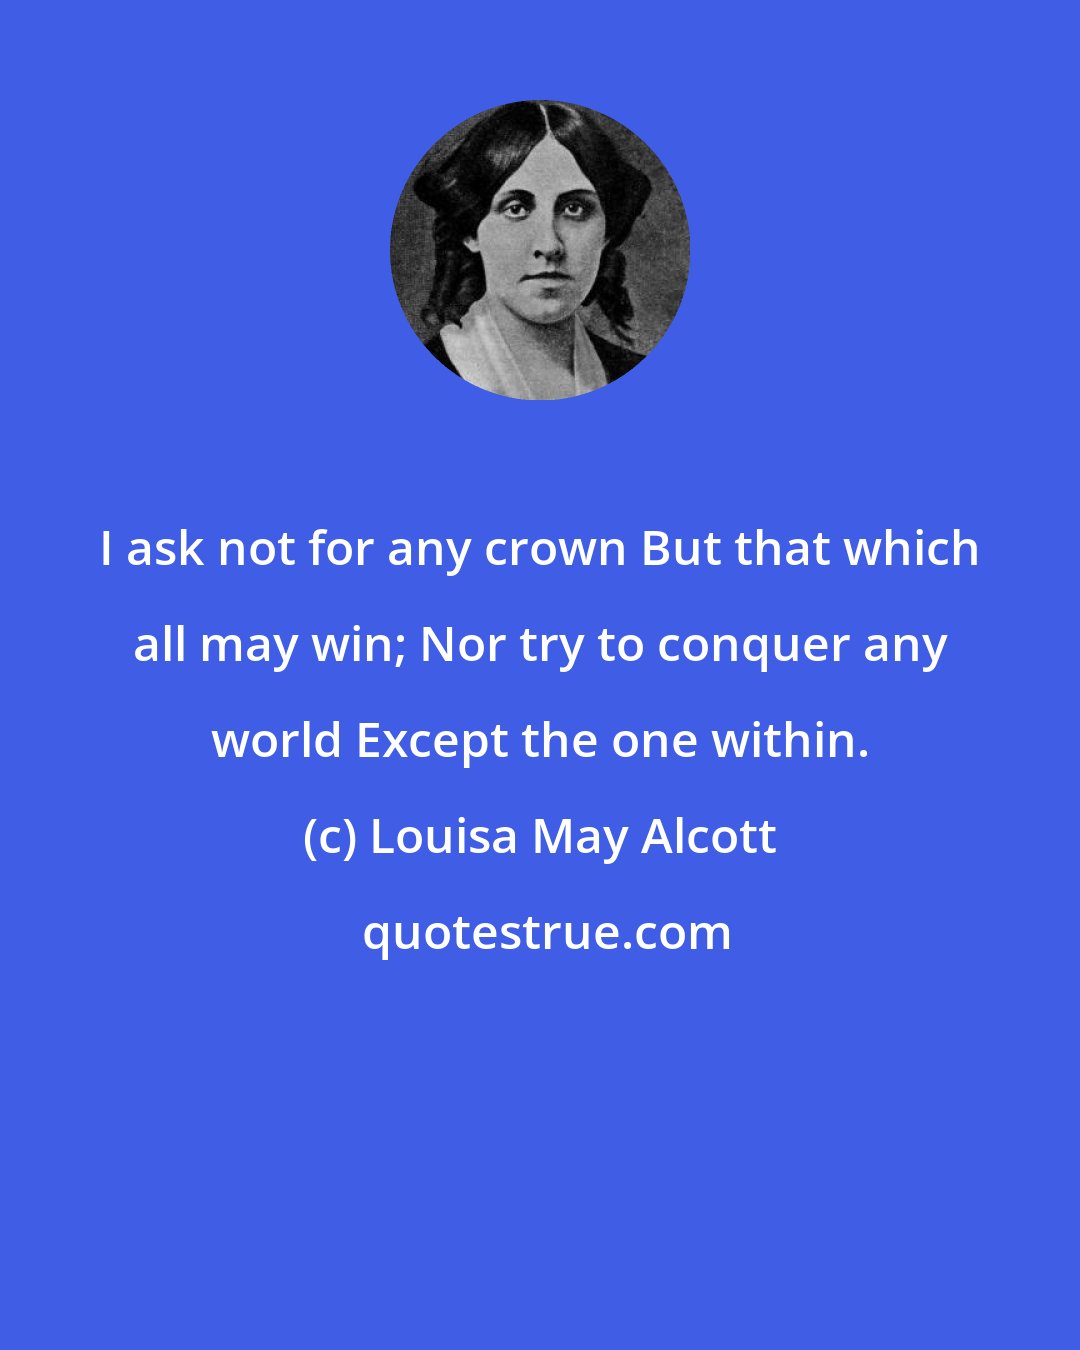 Louisa May Alcott: I ask not for any crown But that which all may win; Nor try to conquer any world Except the one within.